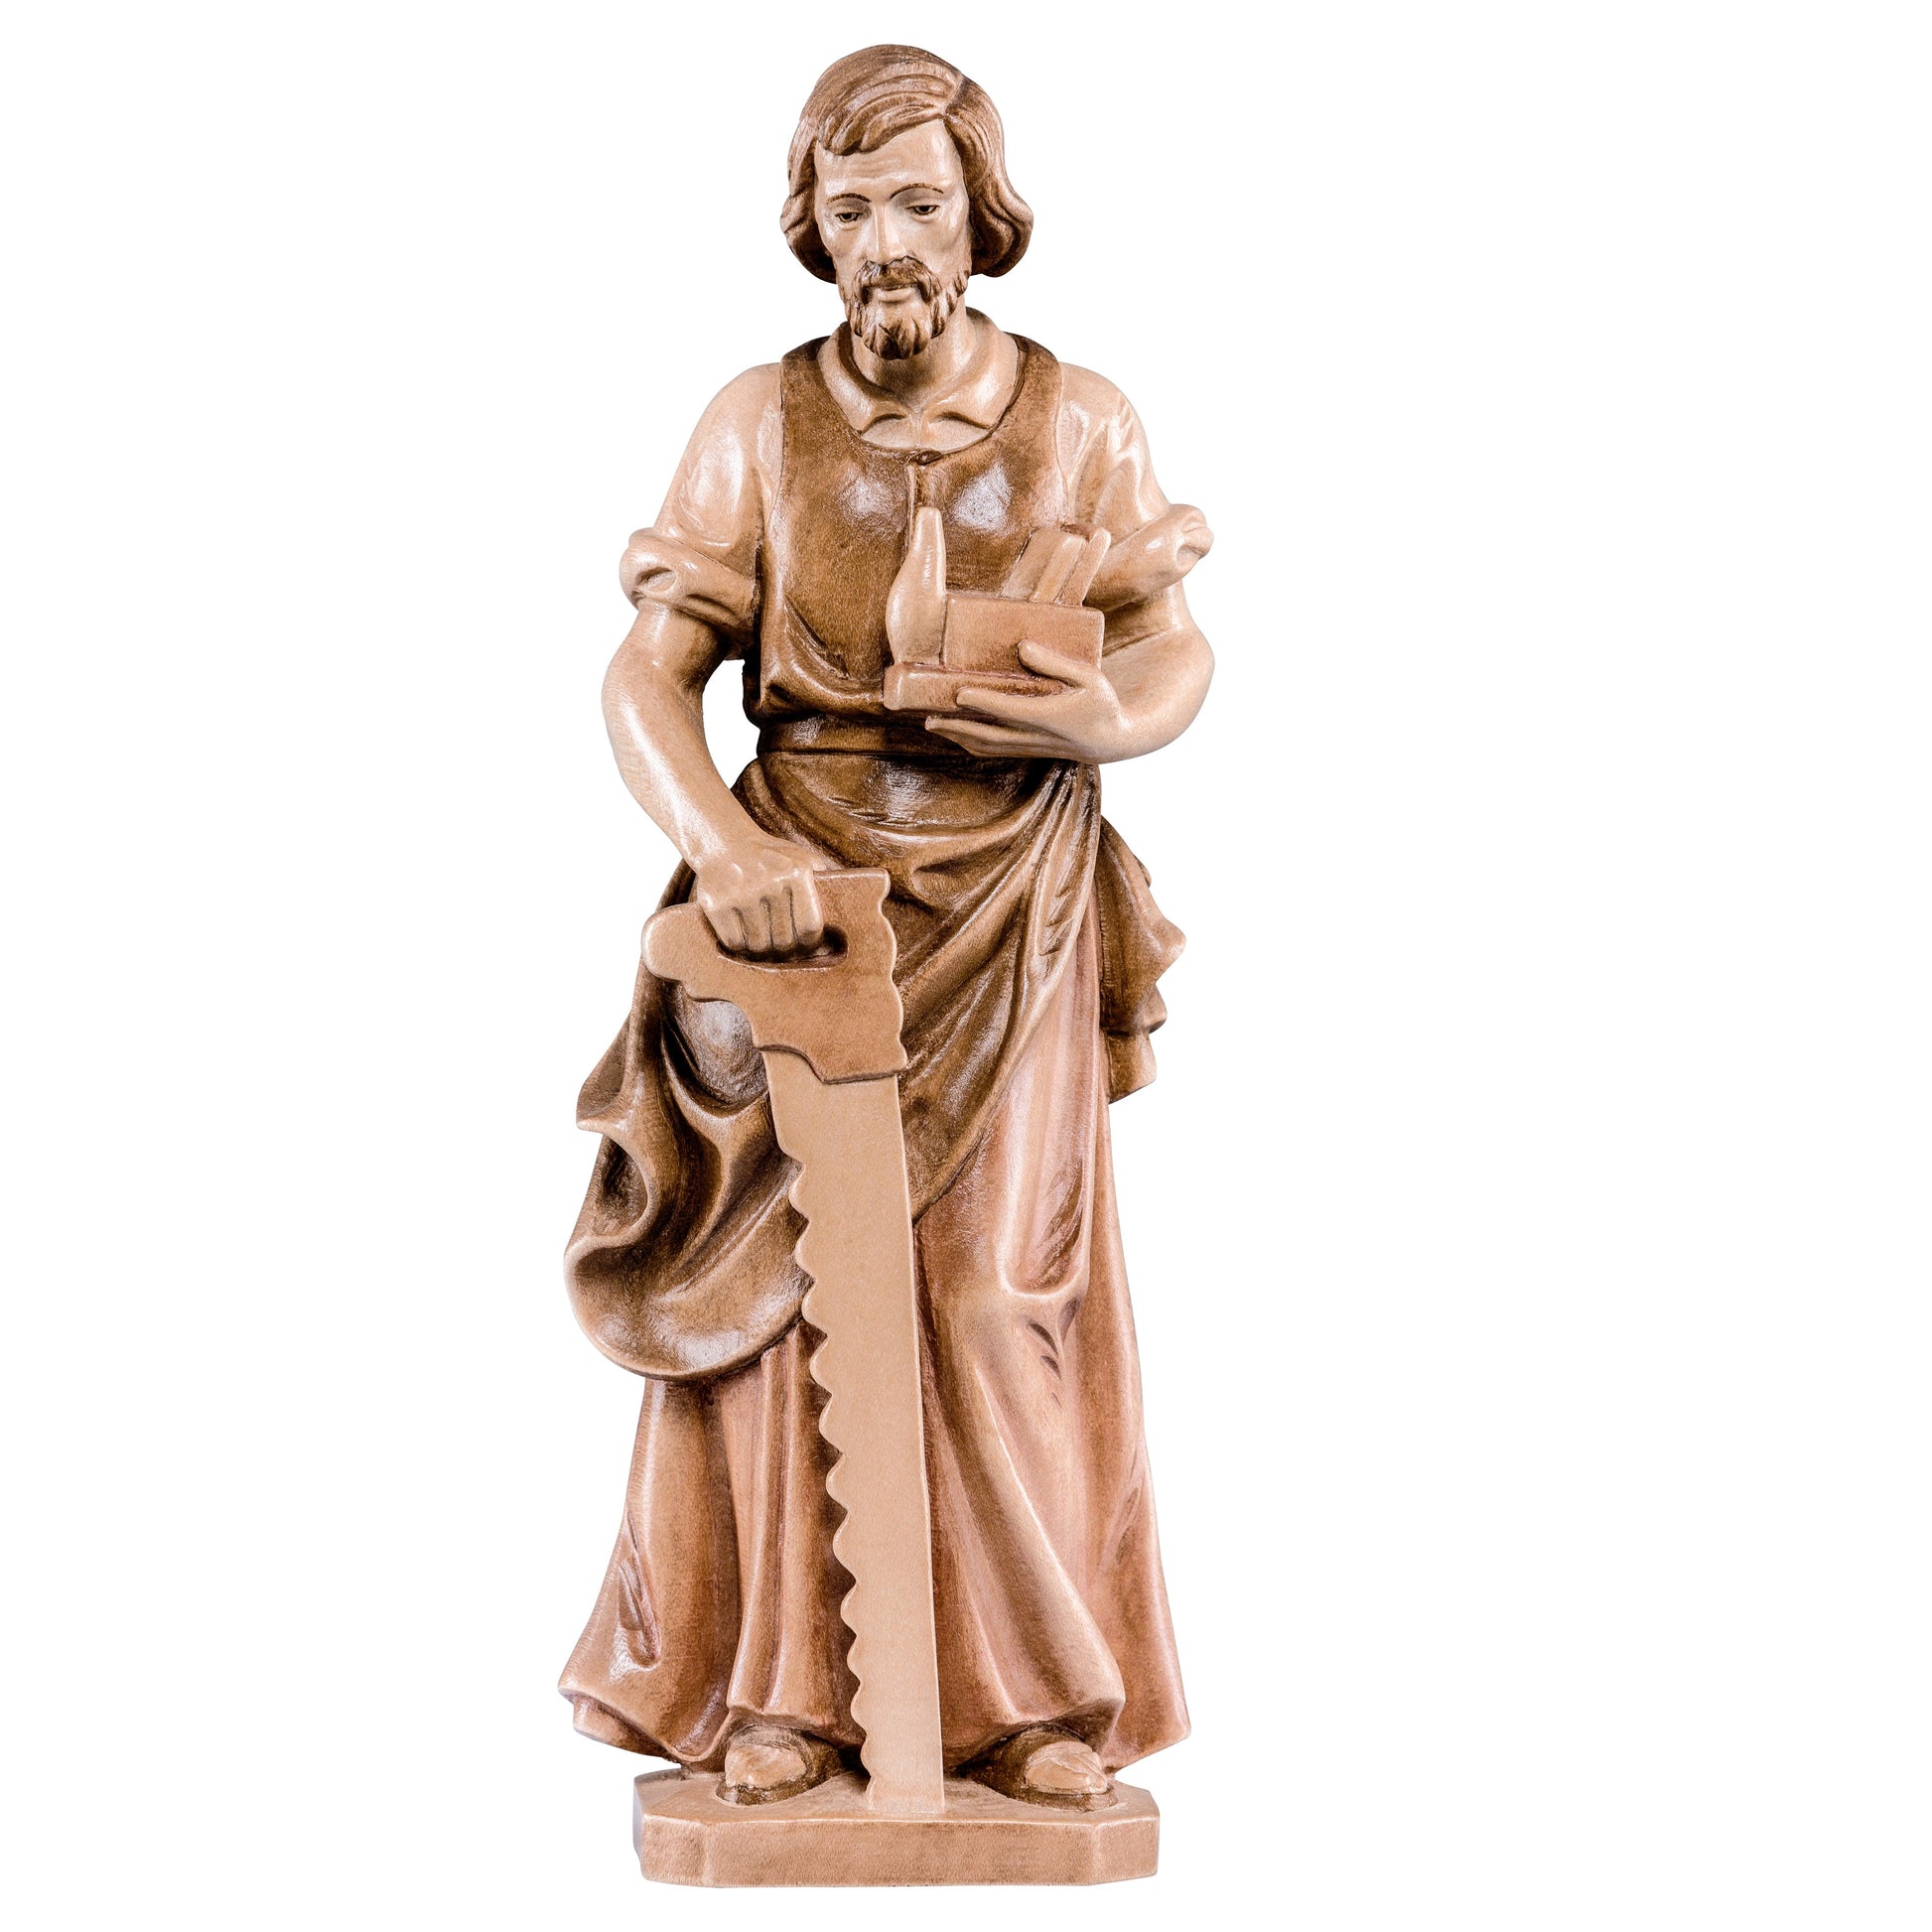 Mondo Cattolico Glossy / 13 cm (5.1 in) Wooden statue of St. Joseph as worker